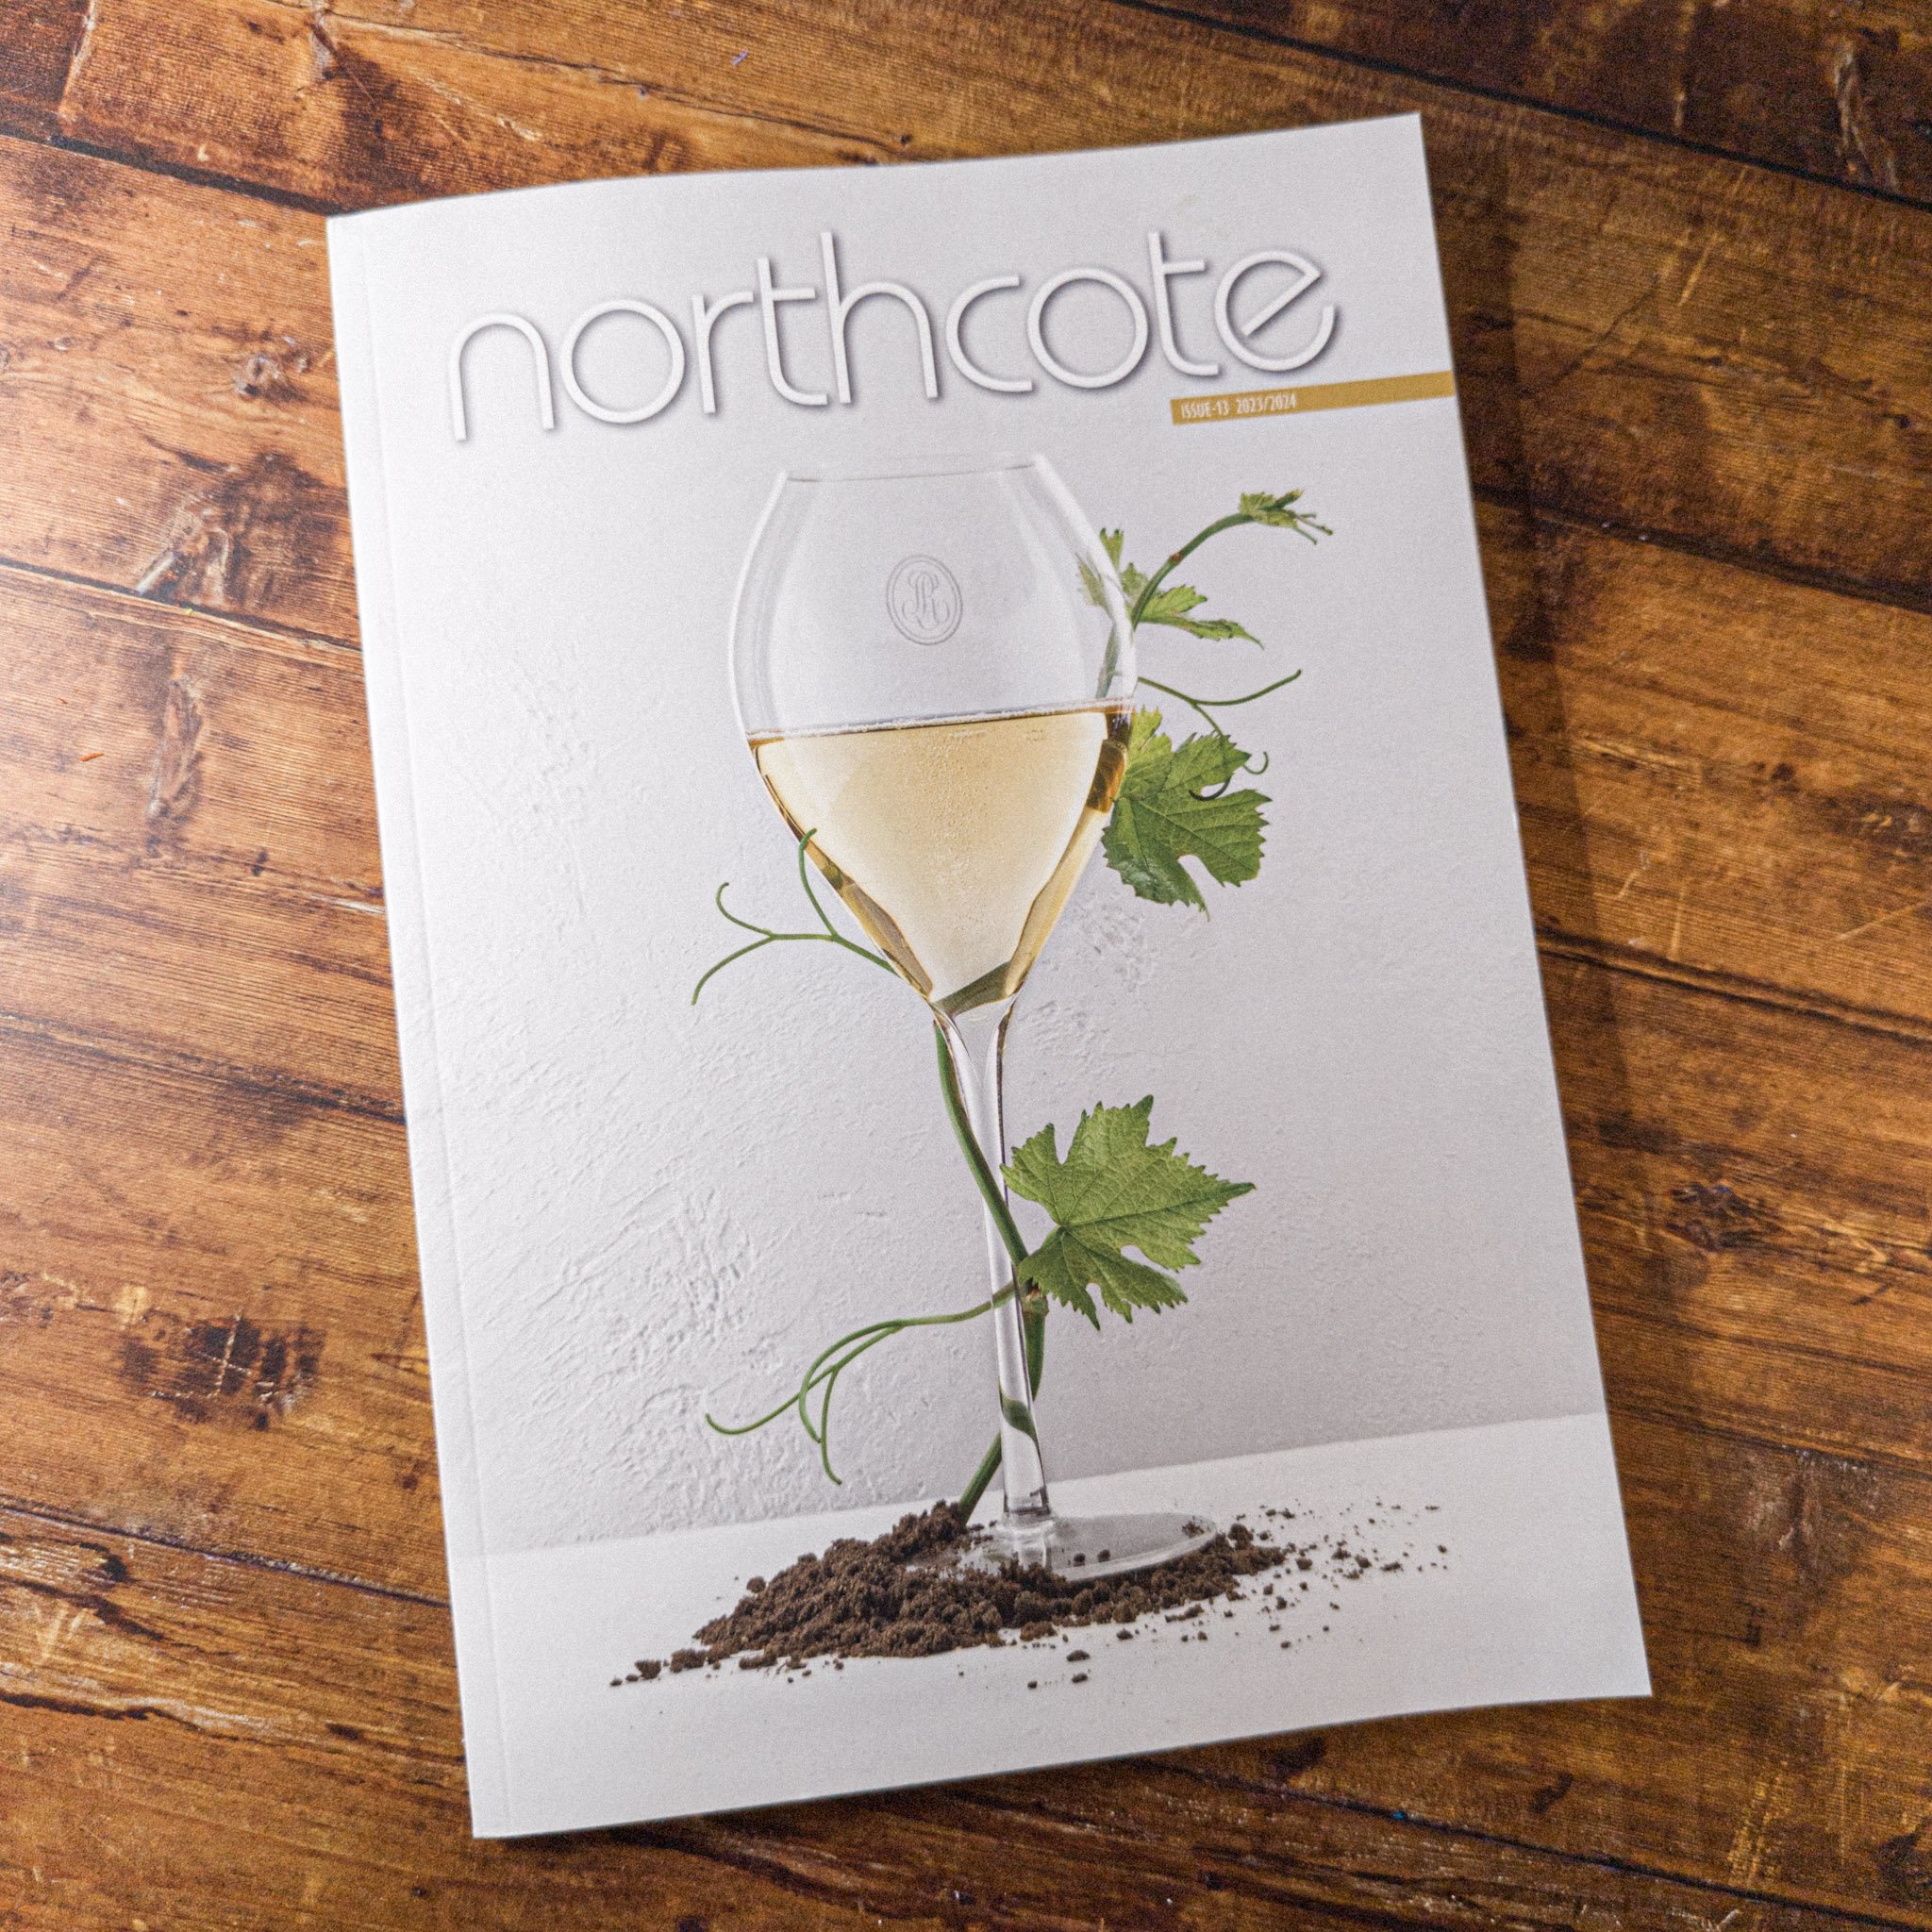 northcote-magazine-front-cover.jpg